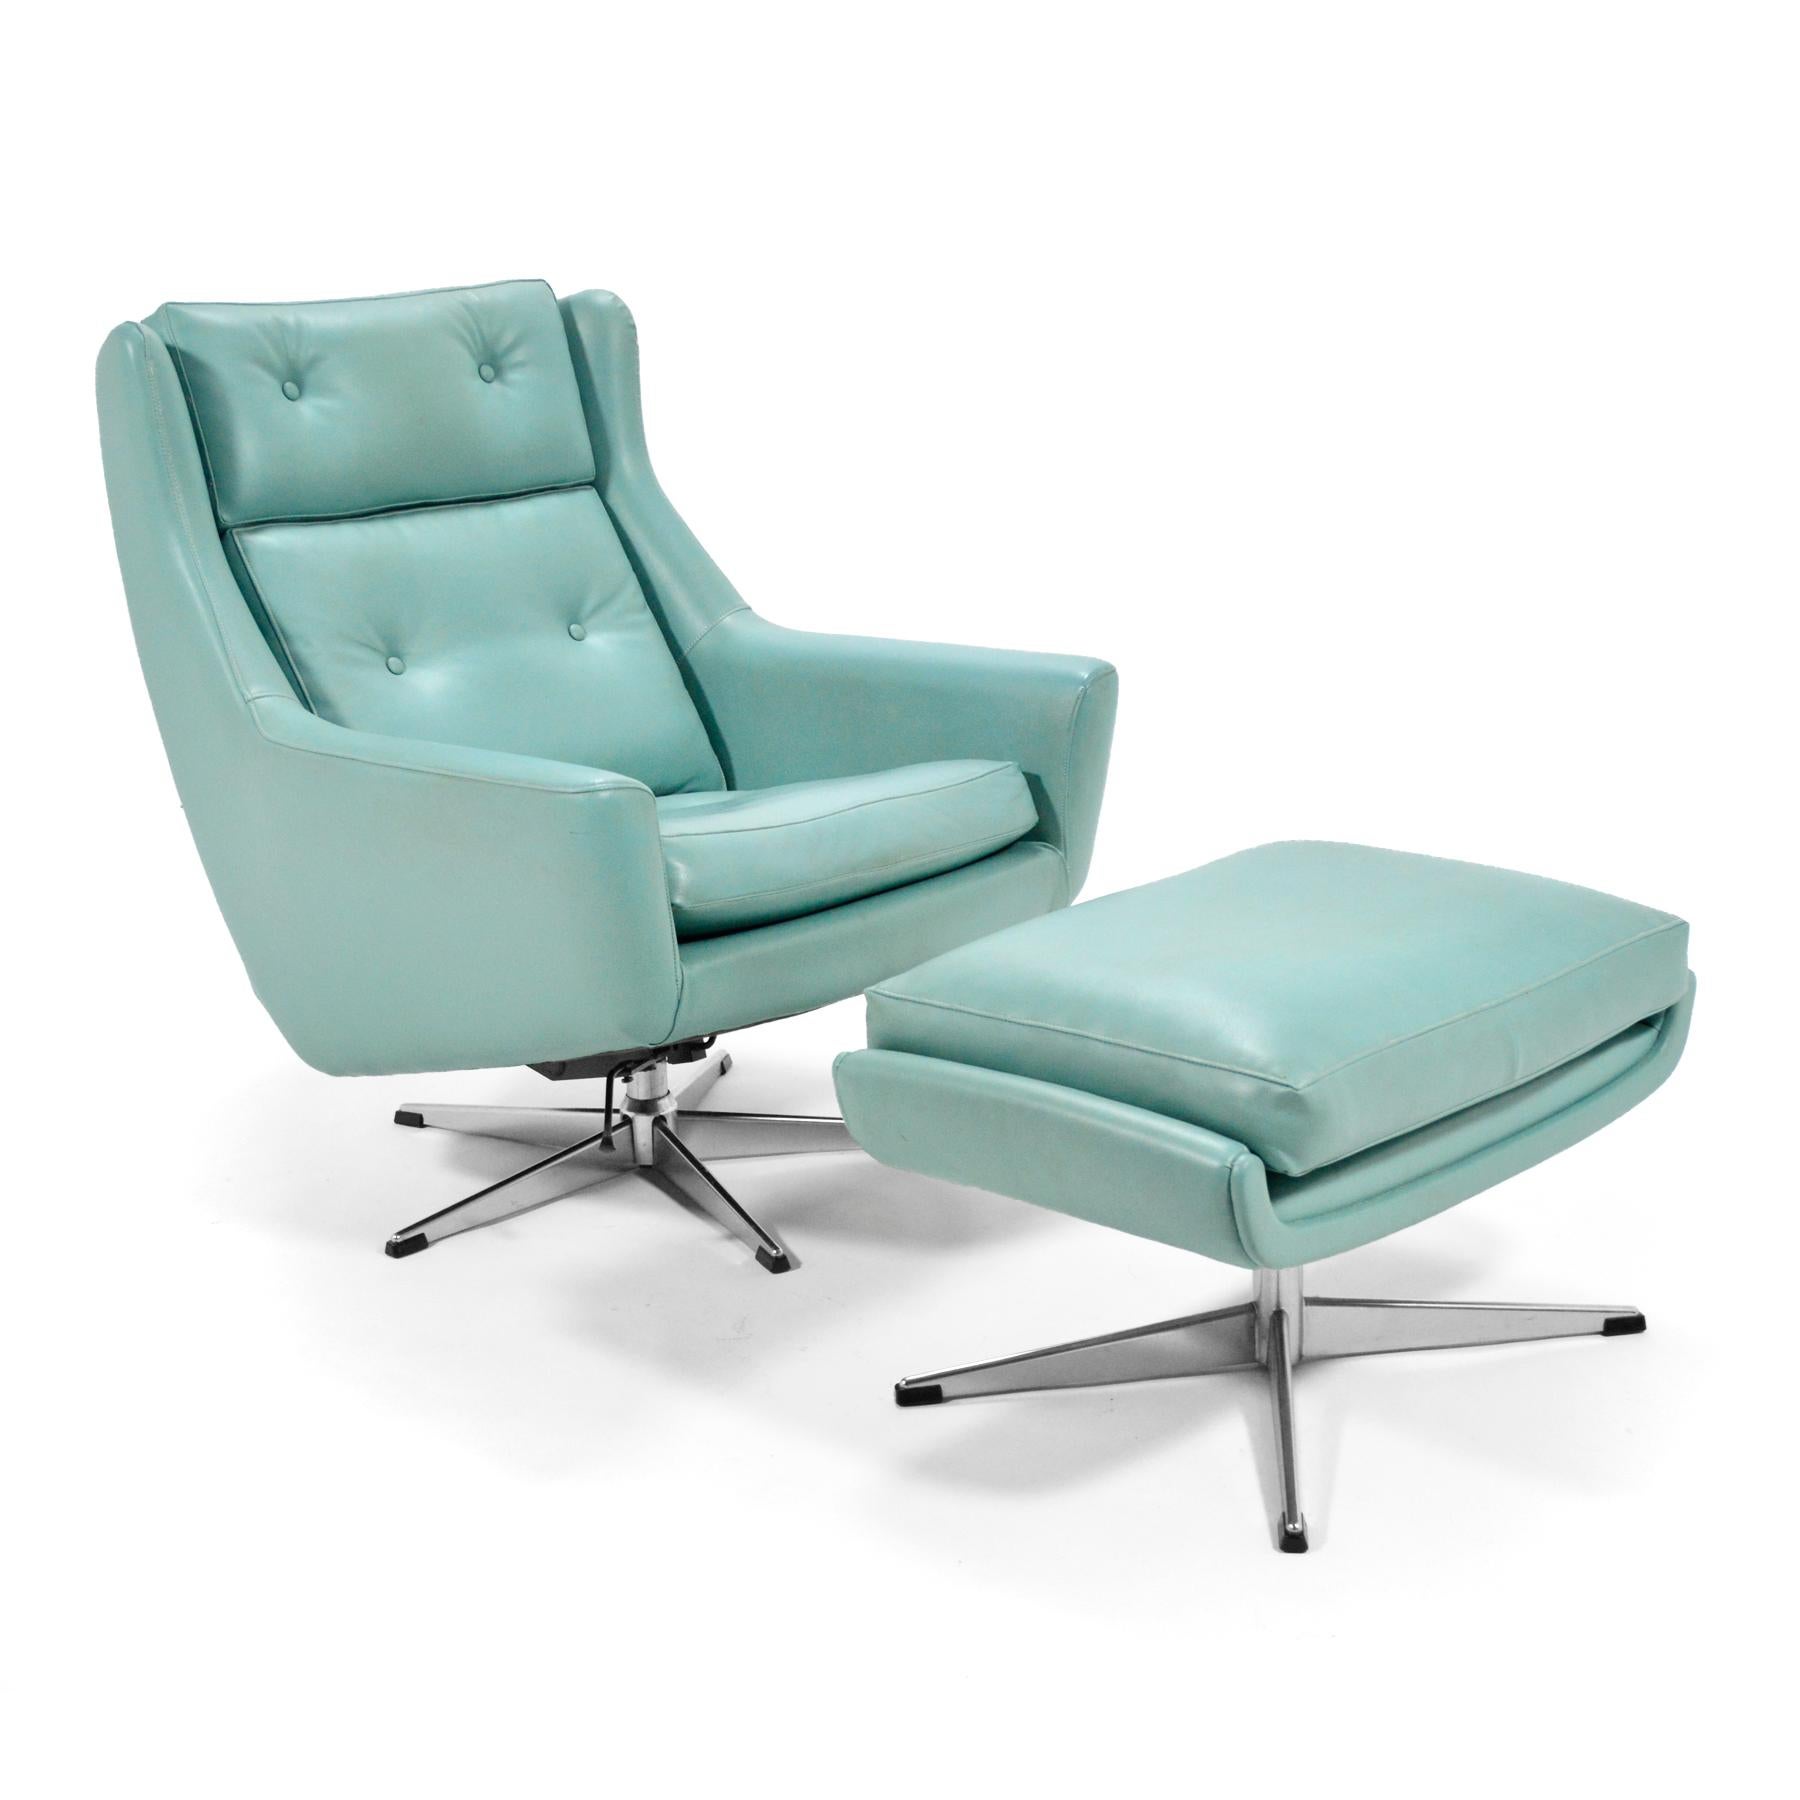 This supremely comfortable lounge chair features swivel function and two positions of locking recline. Designed by Aage Christiansen for Erhardsen & Andersen Denmark, it retains its original faux leather.